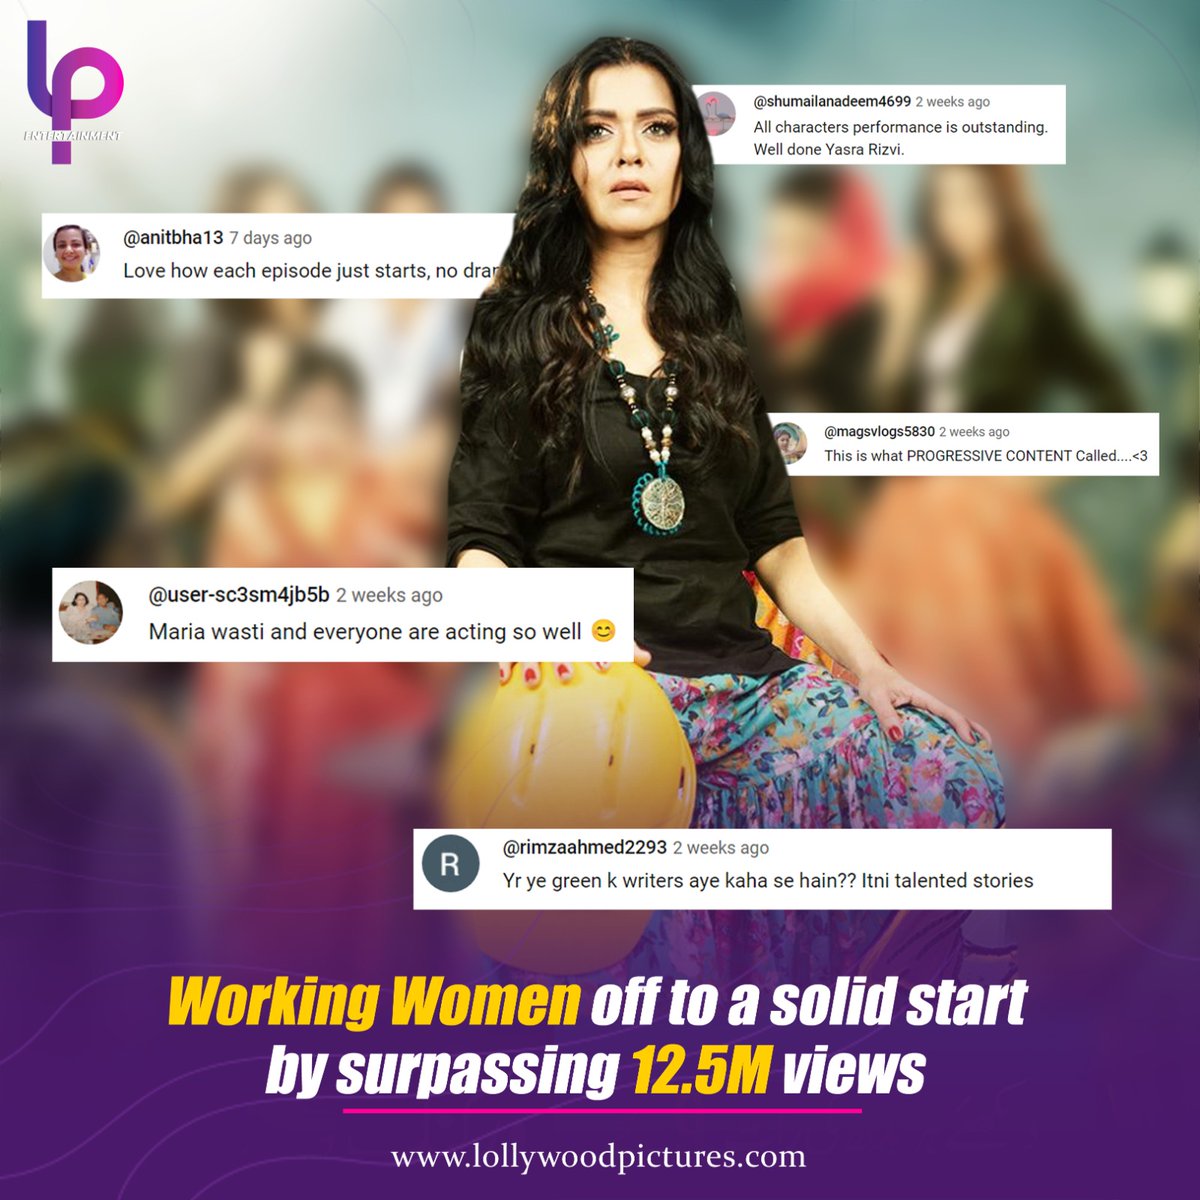 It's been a decent start for multi starrer drama serial 'Working Women' and people are going to give it a go. 🙌👏

#WorkingWomen #MariaWasti #AnoushayAbbasi #LPEntertainment #LollywoodPicturesEntertainment #GreenEntertainmentTV